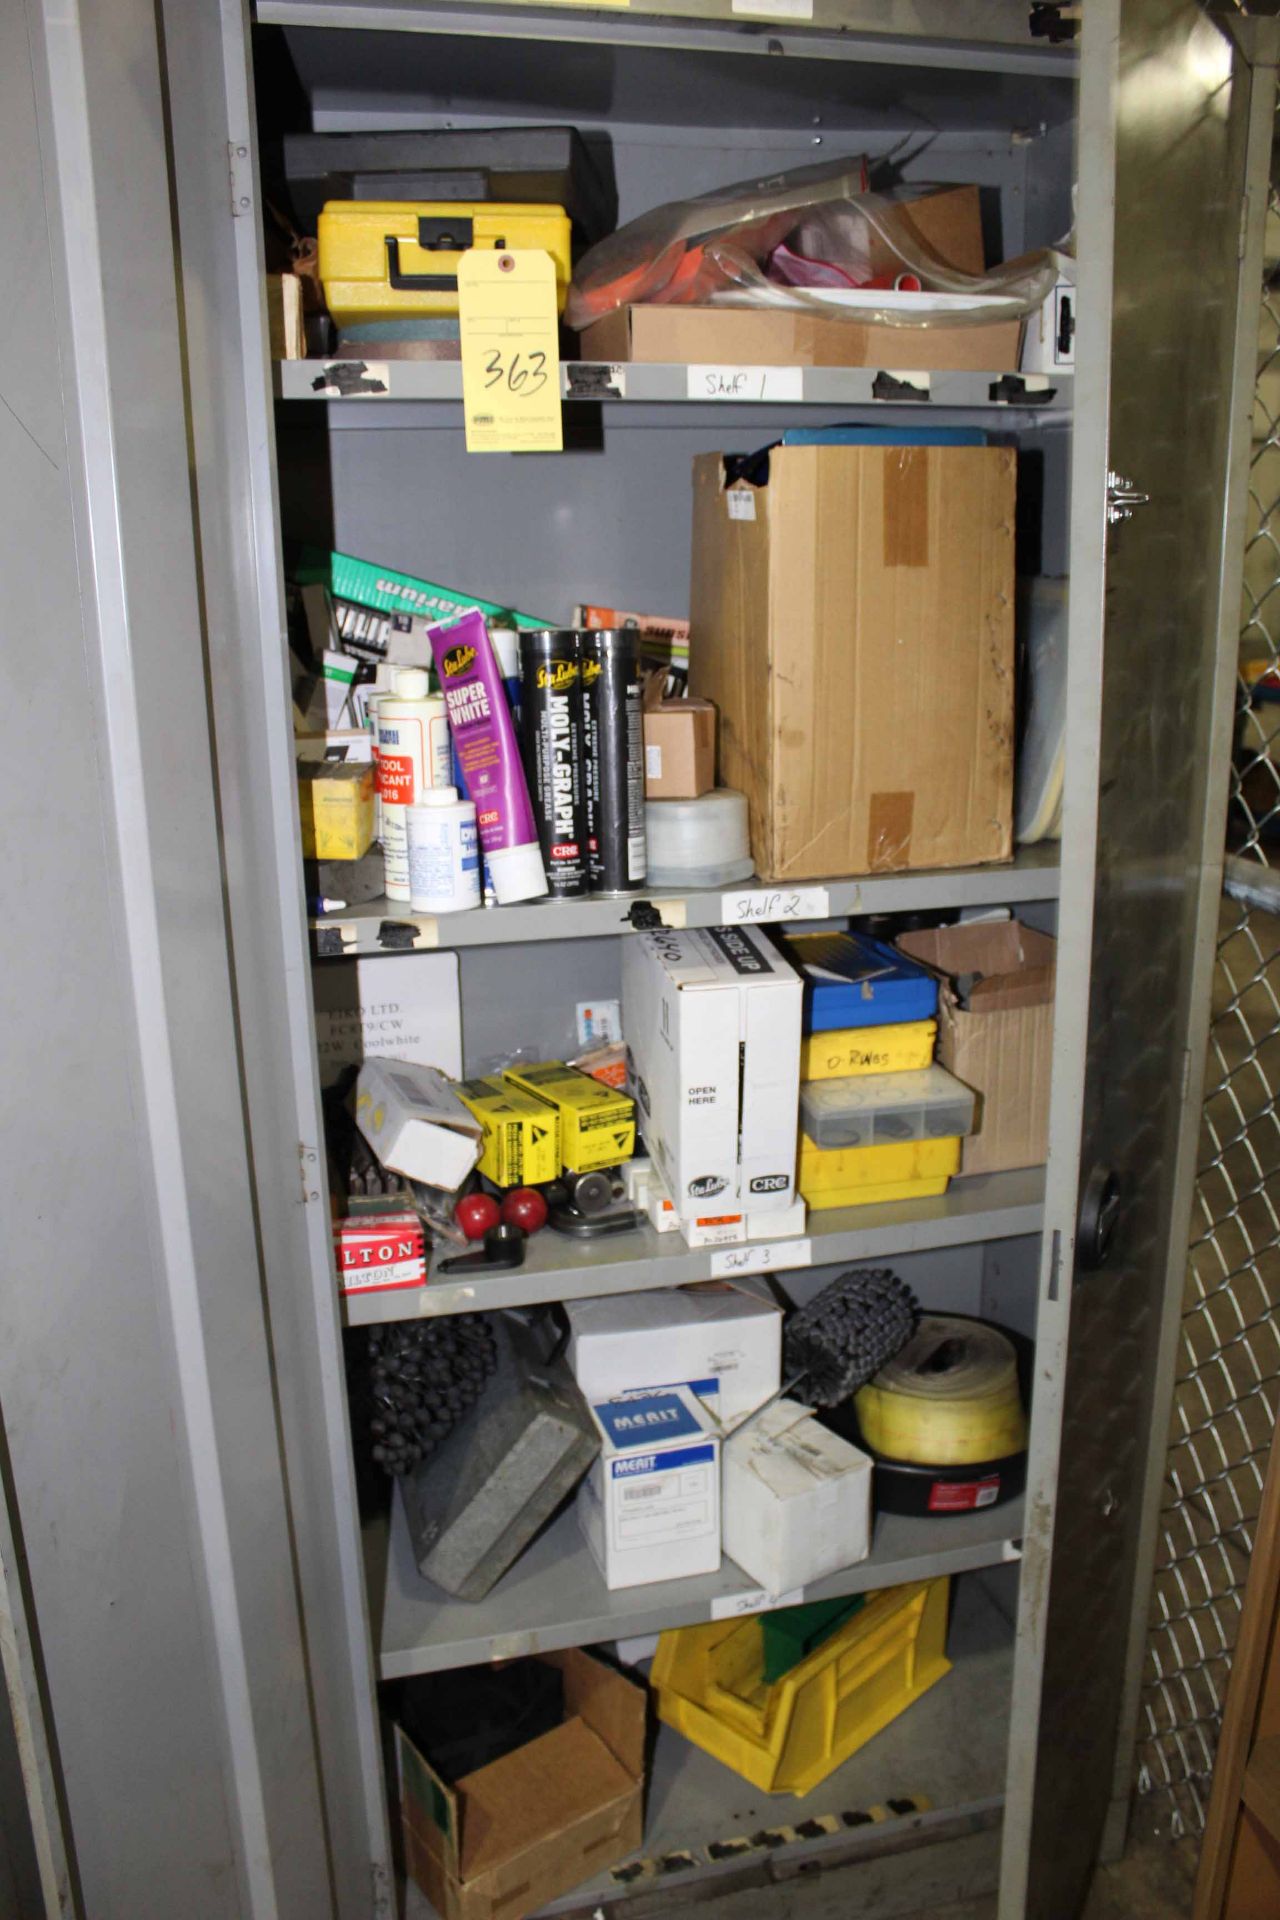 LOT CONTENTS OF CABINET: misc. shop hardware